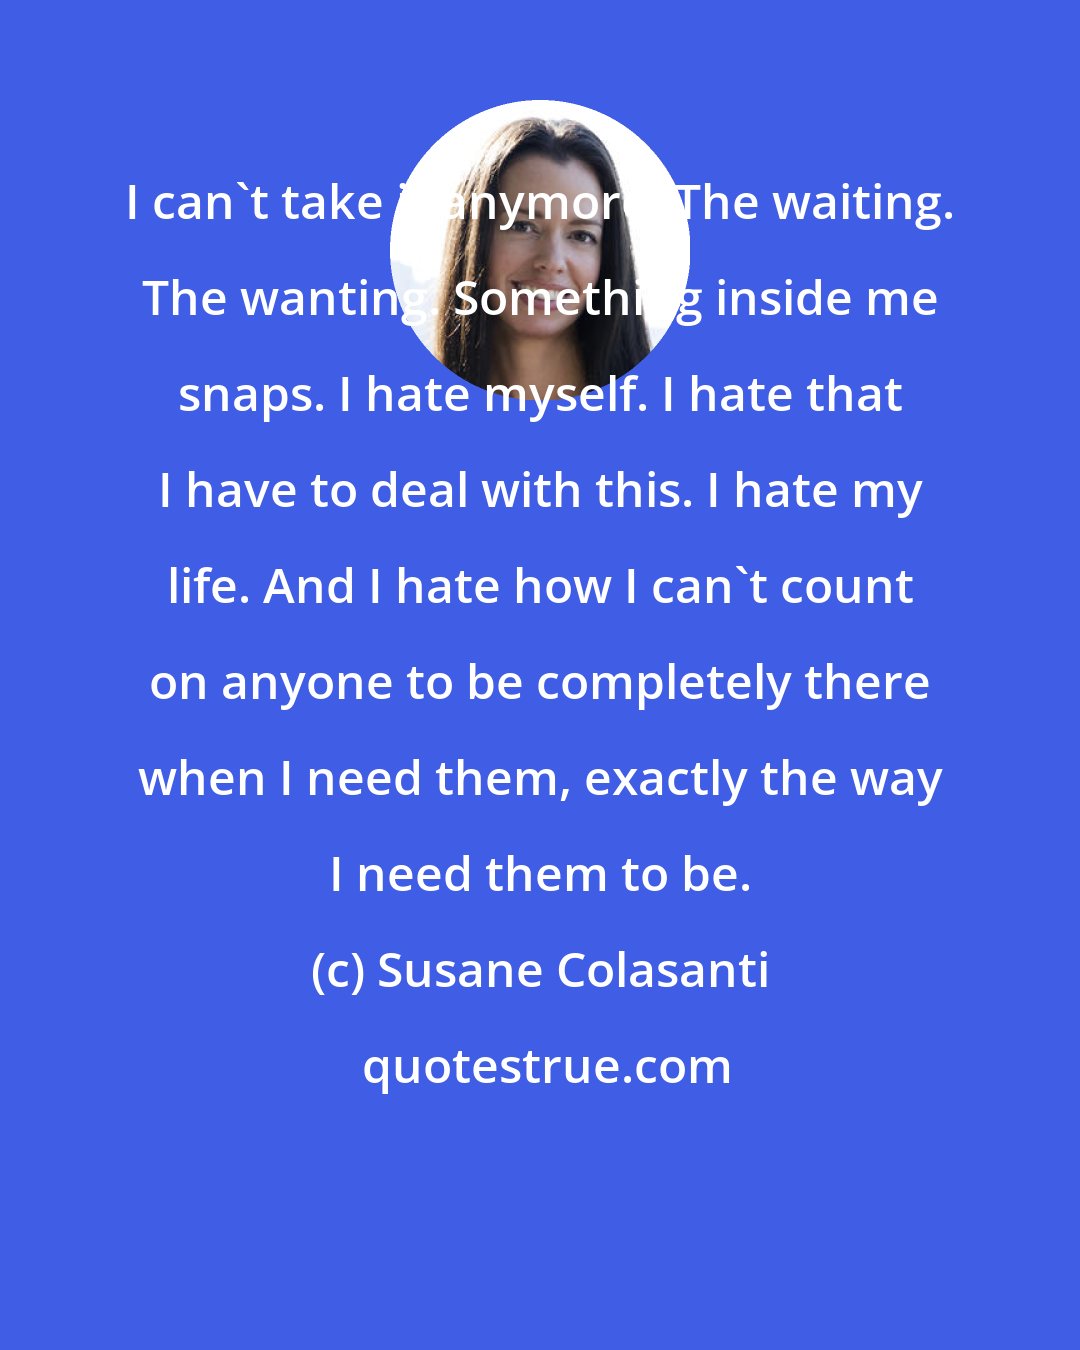 Susane Colasanti: I can't take it anymore. The waiting. The wanting. Something inside me snaps. I hate myself. I hate that I have to deal with this. I hate my life. And I hate how I can't count on anyone to be completely there when I need them, exactly the way I need them to be.